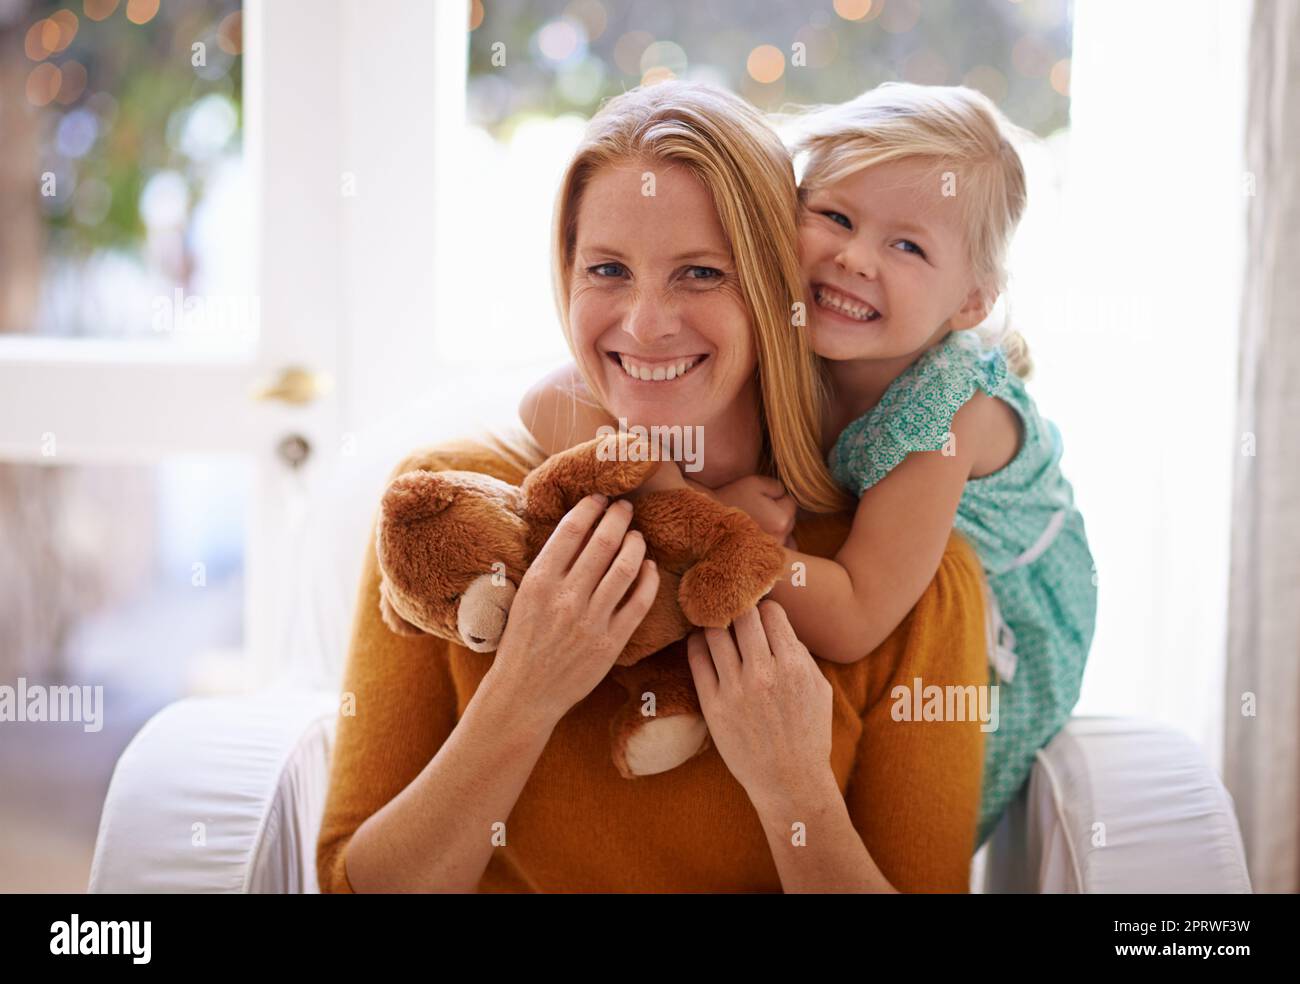 Shes so lovable. Cropped portrait of a little girl hugging her mother from behind. Stock Photo